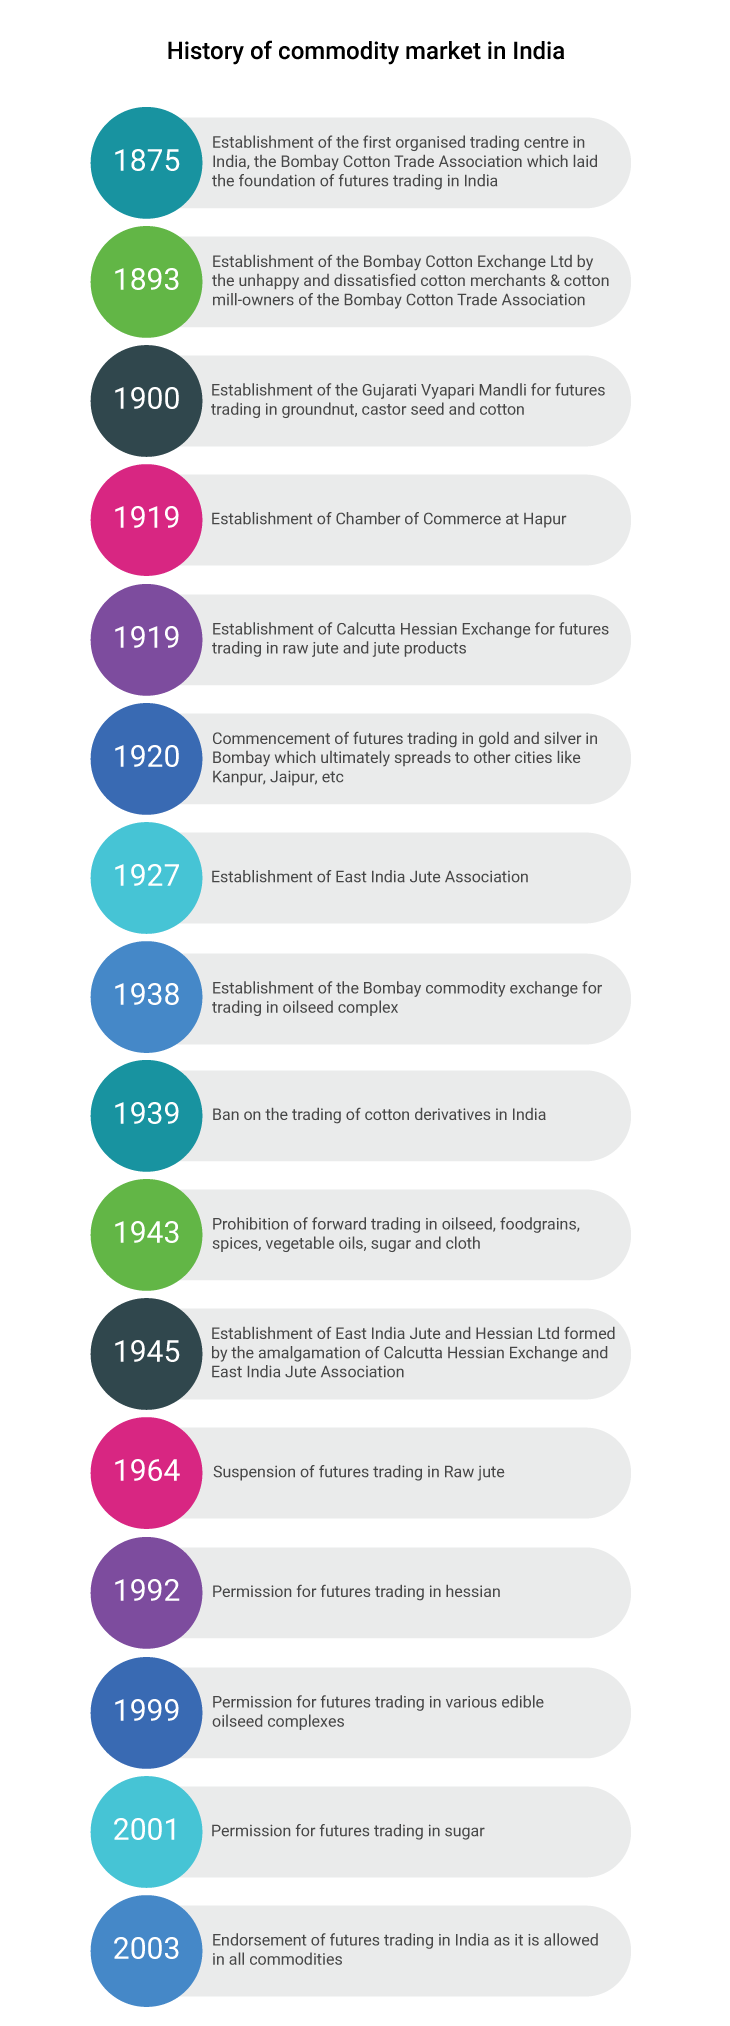 History of Commodity Trading in India